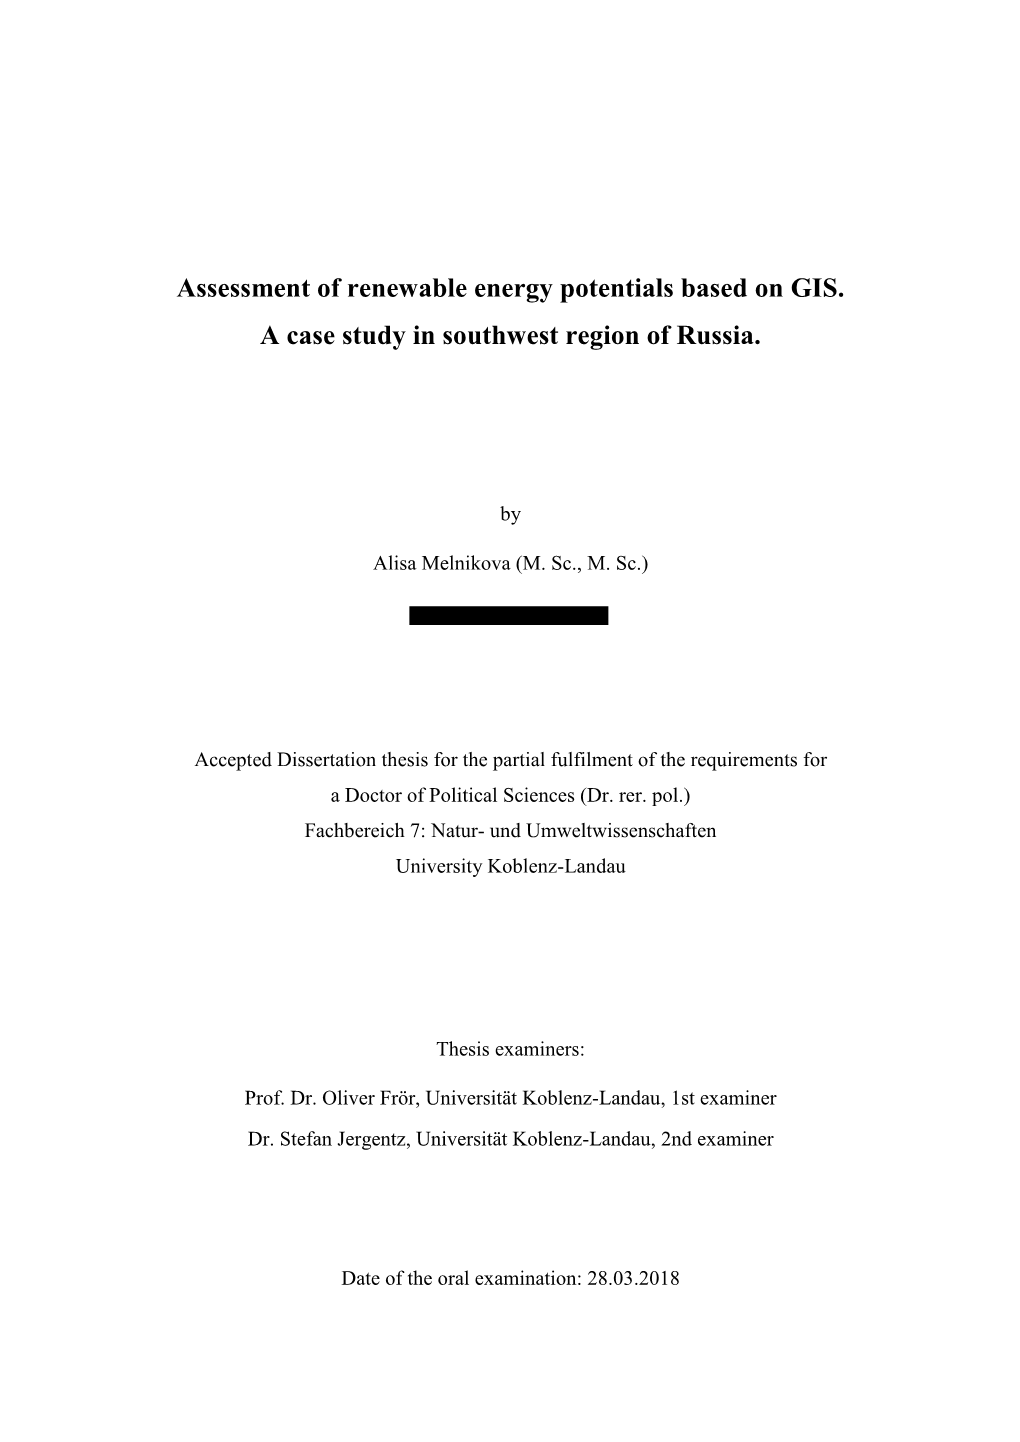 Assessment of Renewable Energy Potentials Based on GIS. a Case Study in Southwest Region of Russia